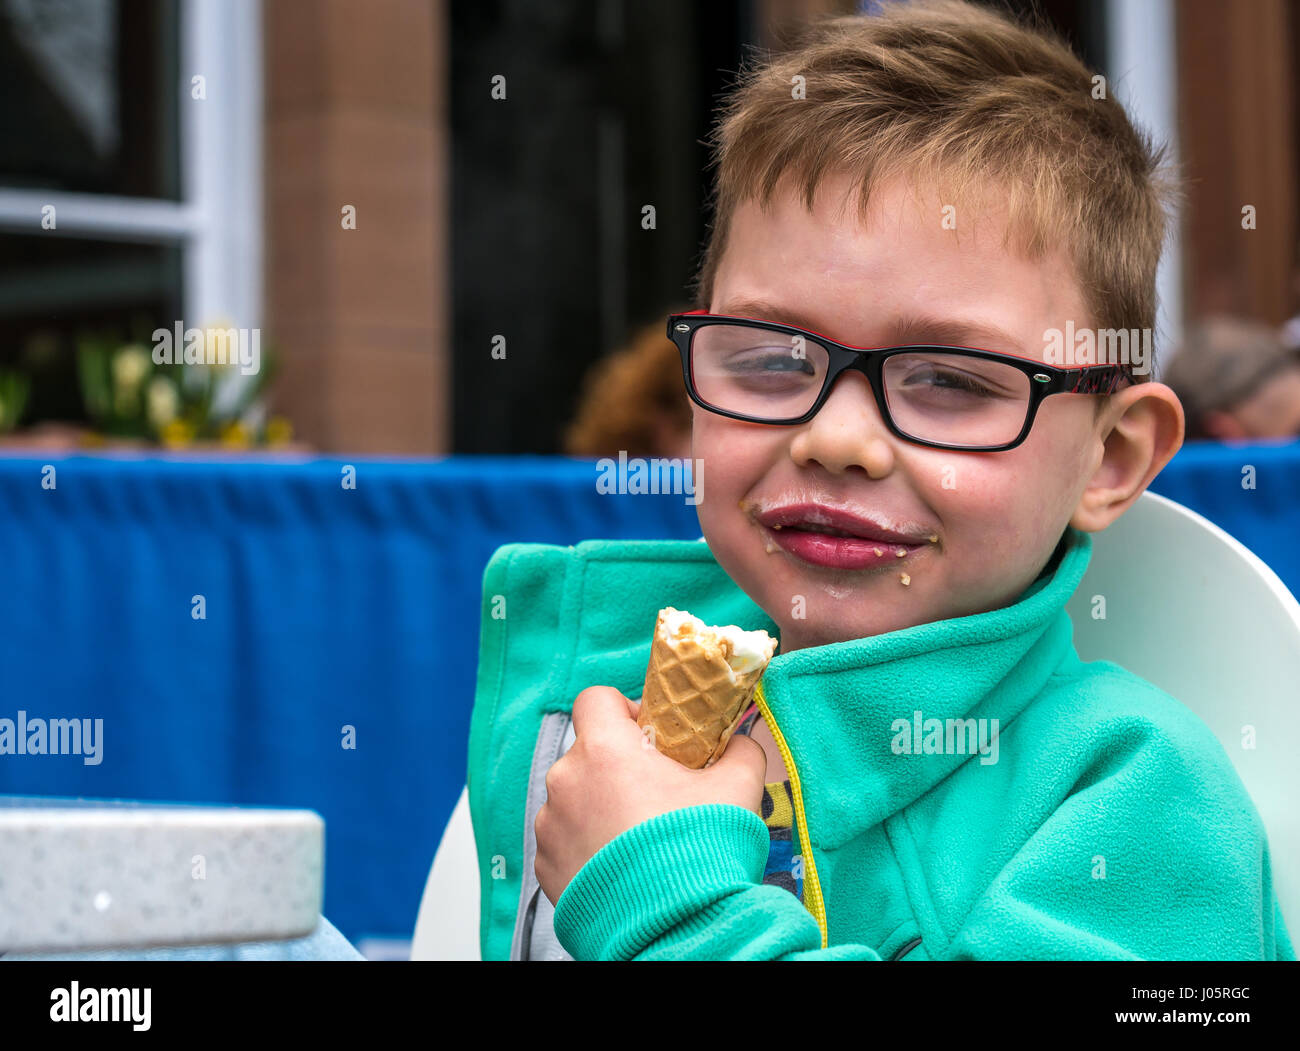 Young boy smiling eating ice cream cone avec happy air satisfait, Ecosse, Royaume-Uni Banque D'Images